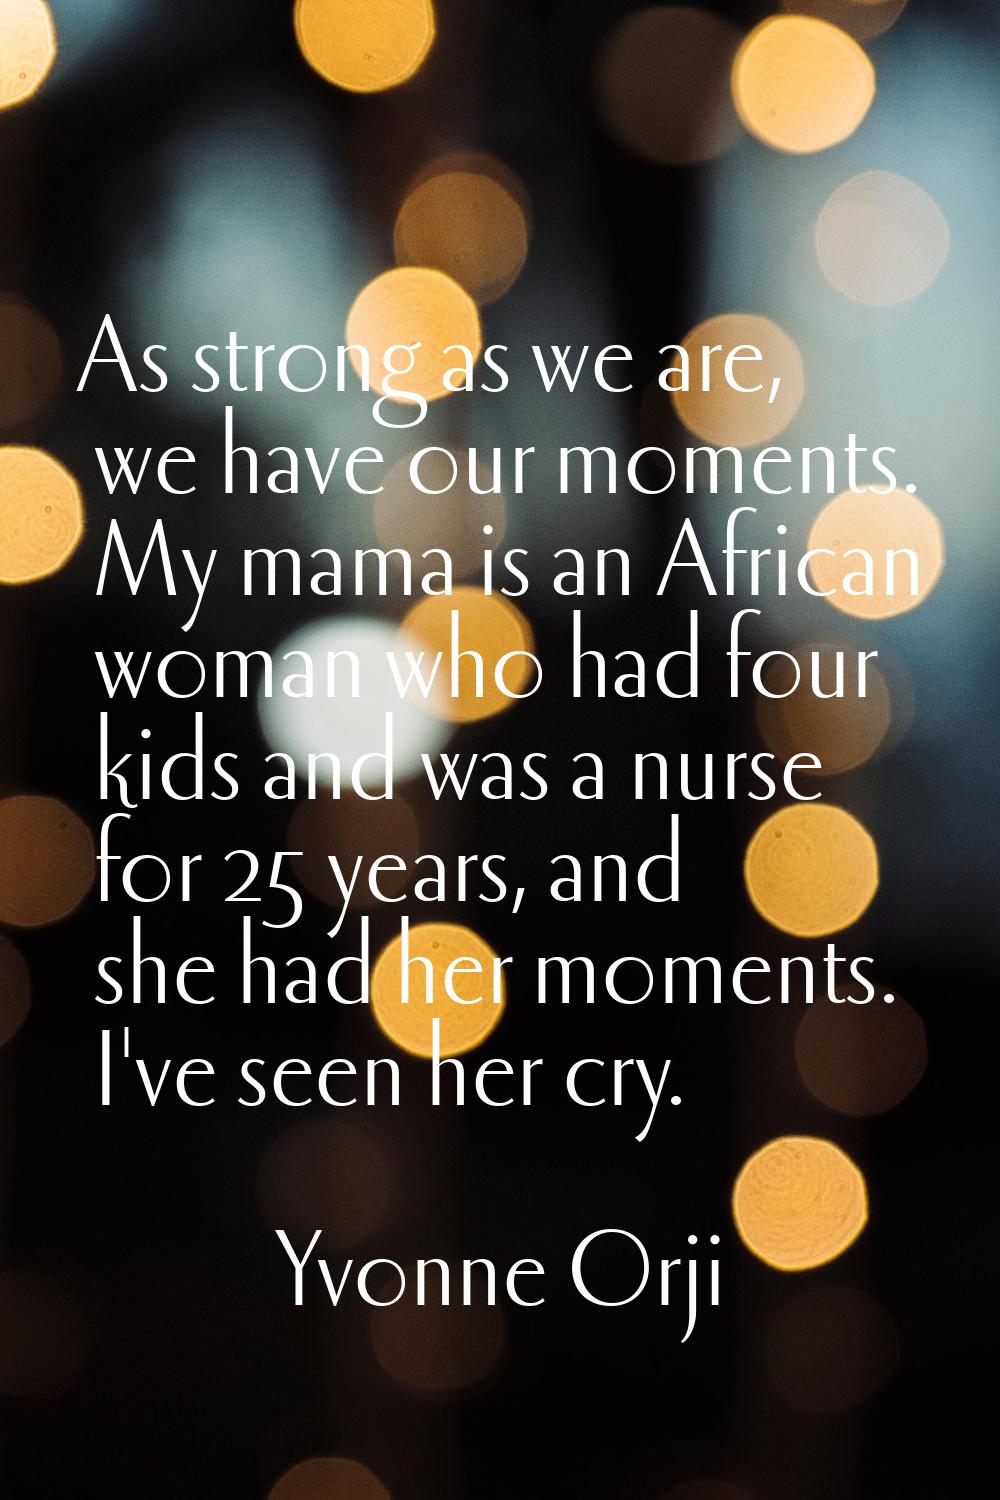 As strong as we are, we have our moments. My mama is an African woman who had four kids and was a n